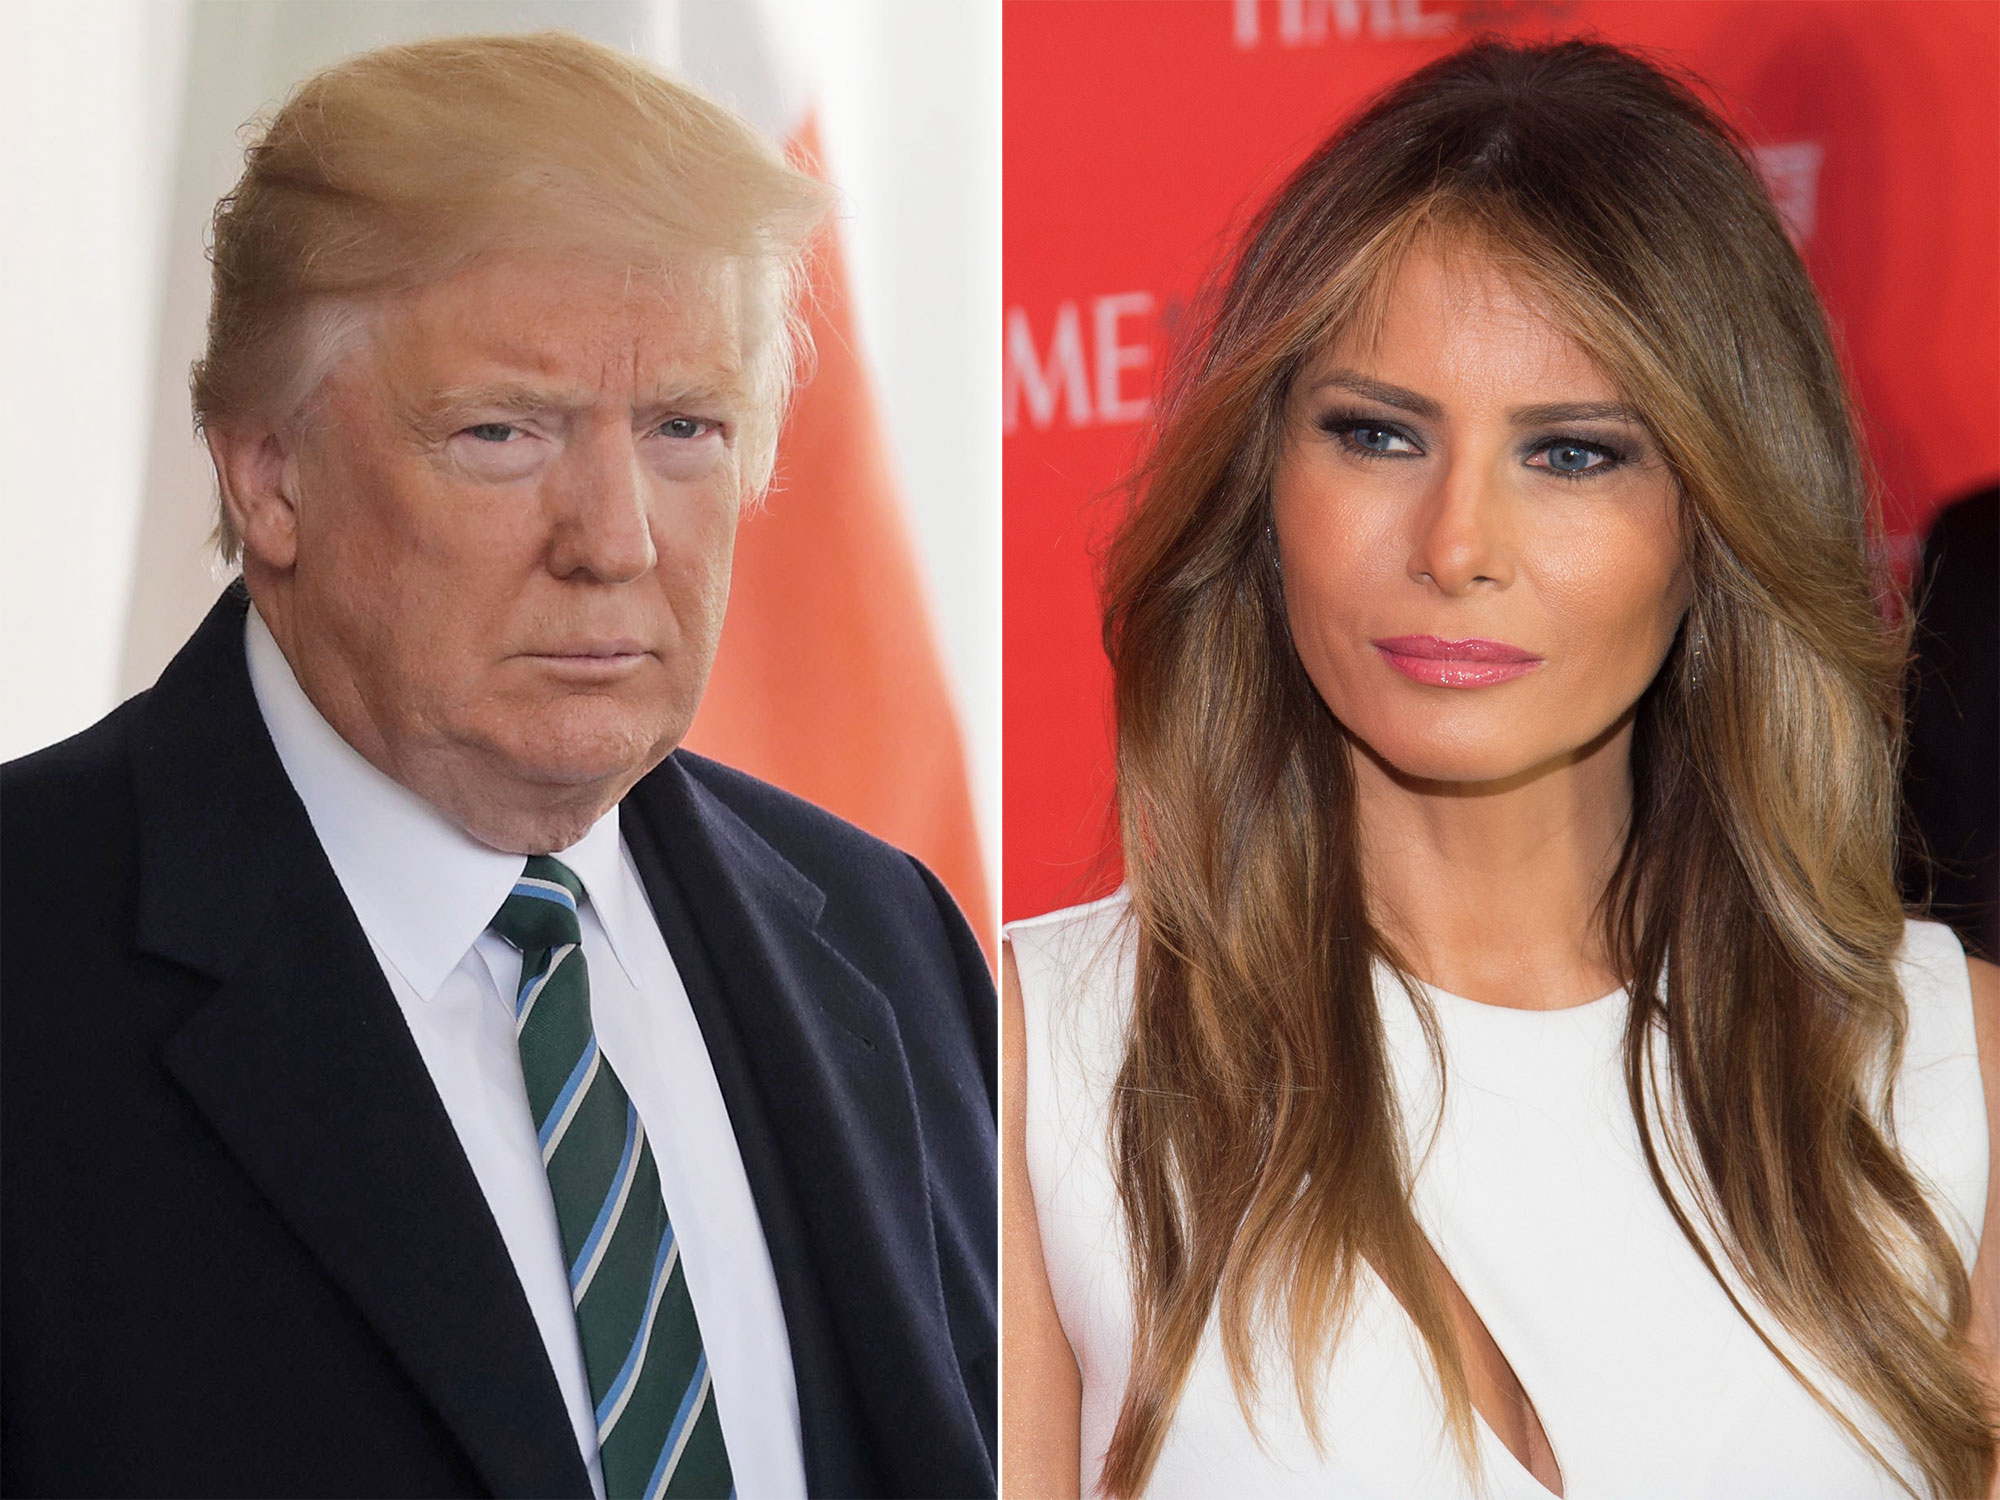 No, Tom Ford Didn't Actually Say That About Melania Trump, But the